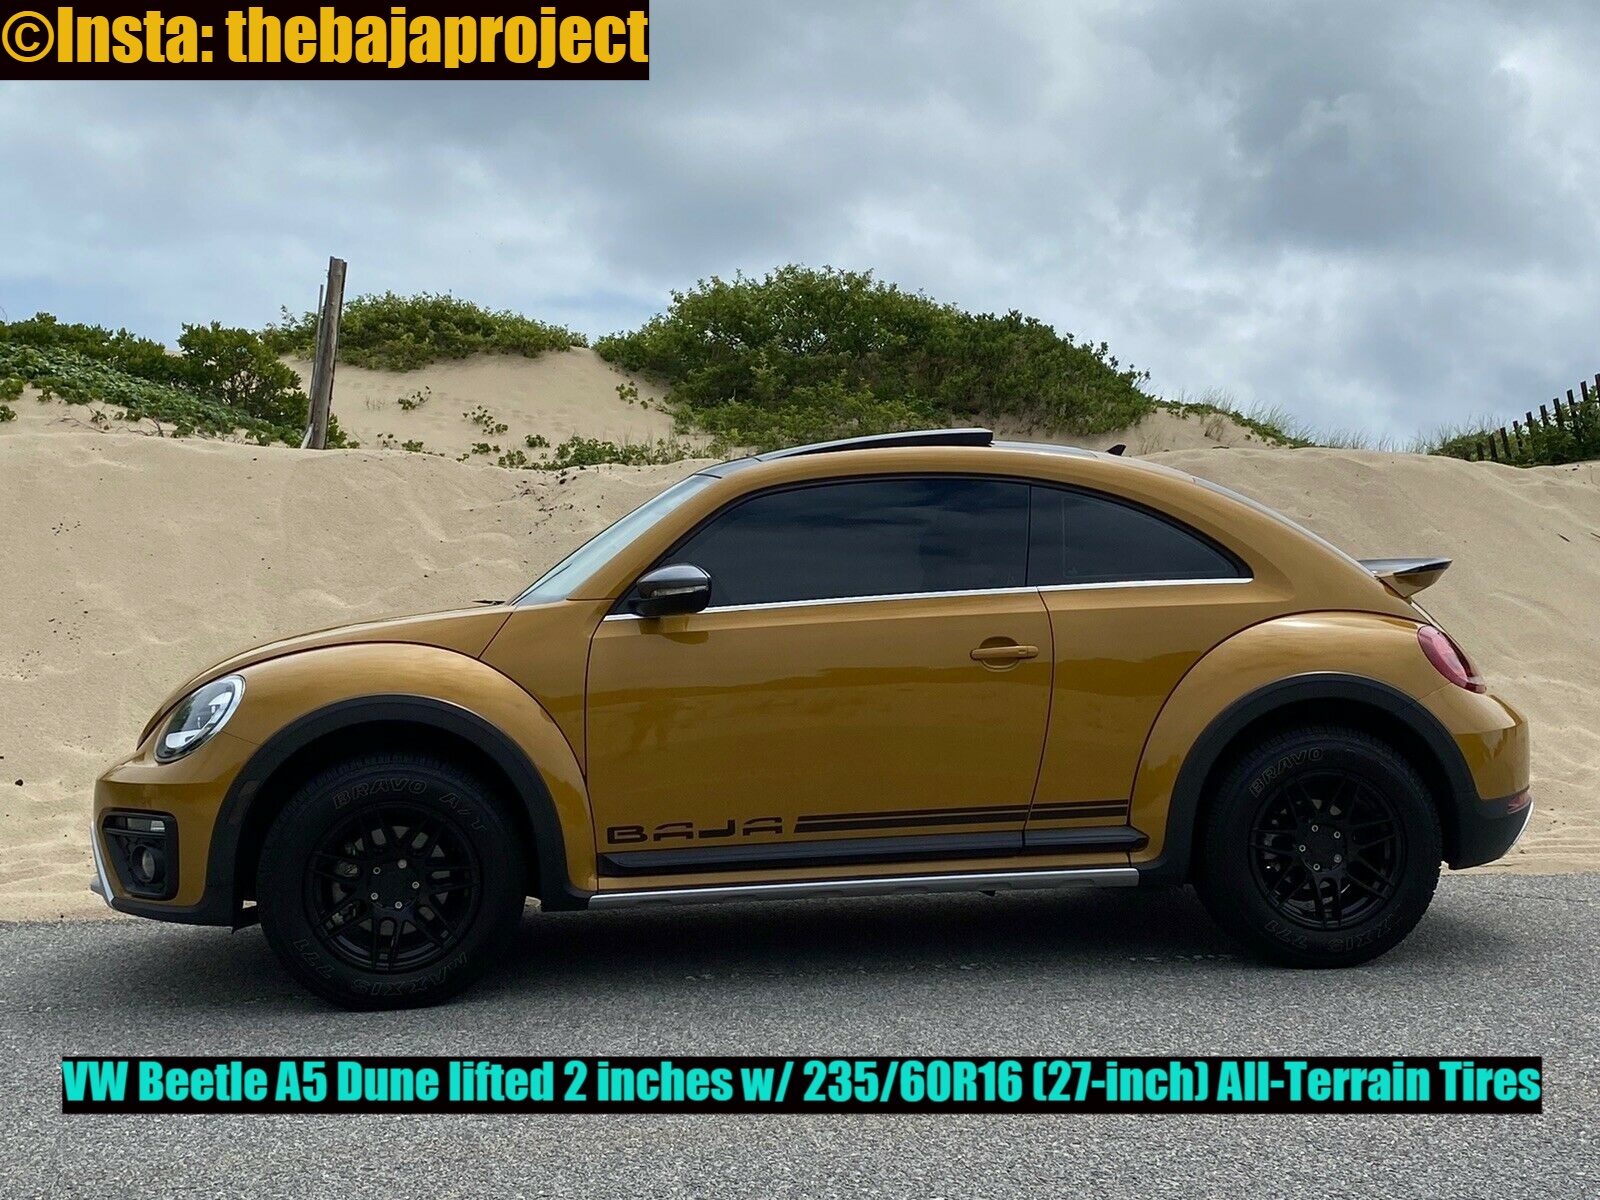 VW New Beetle A5 Dune lifted 2-inches. Follow Jacob @Insta:TheBajaProject